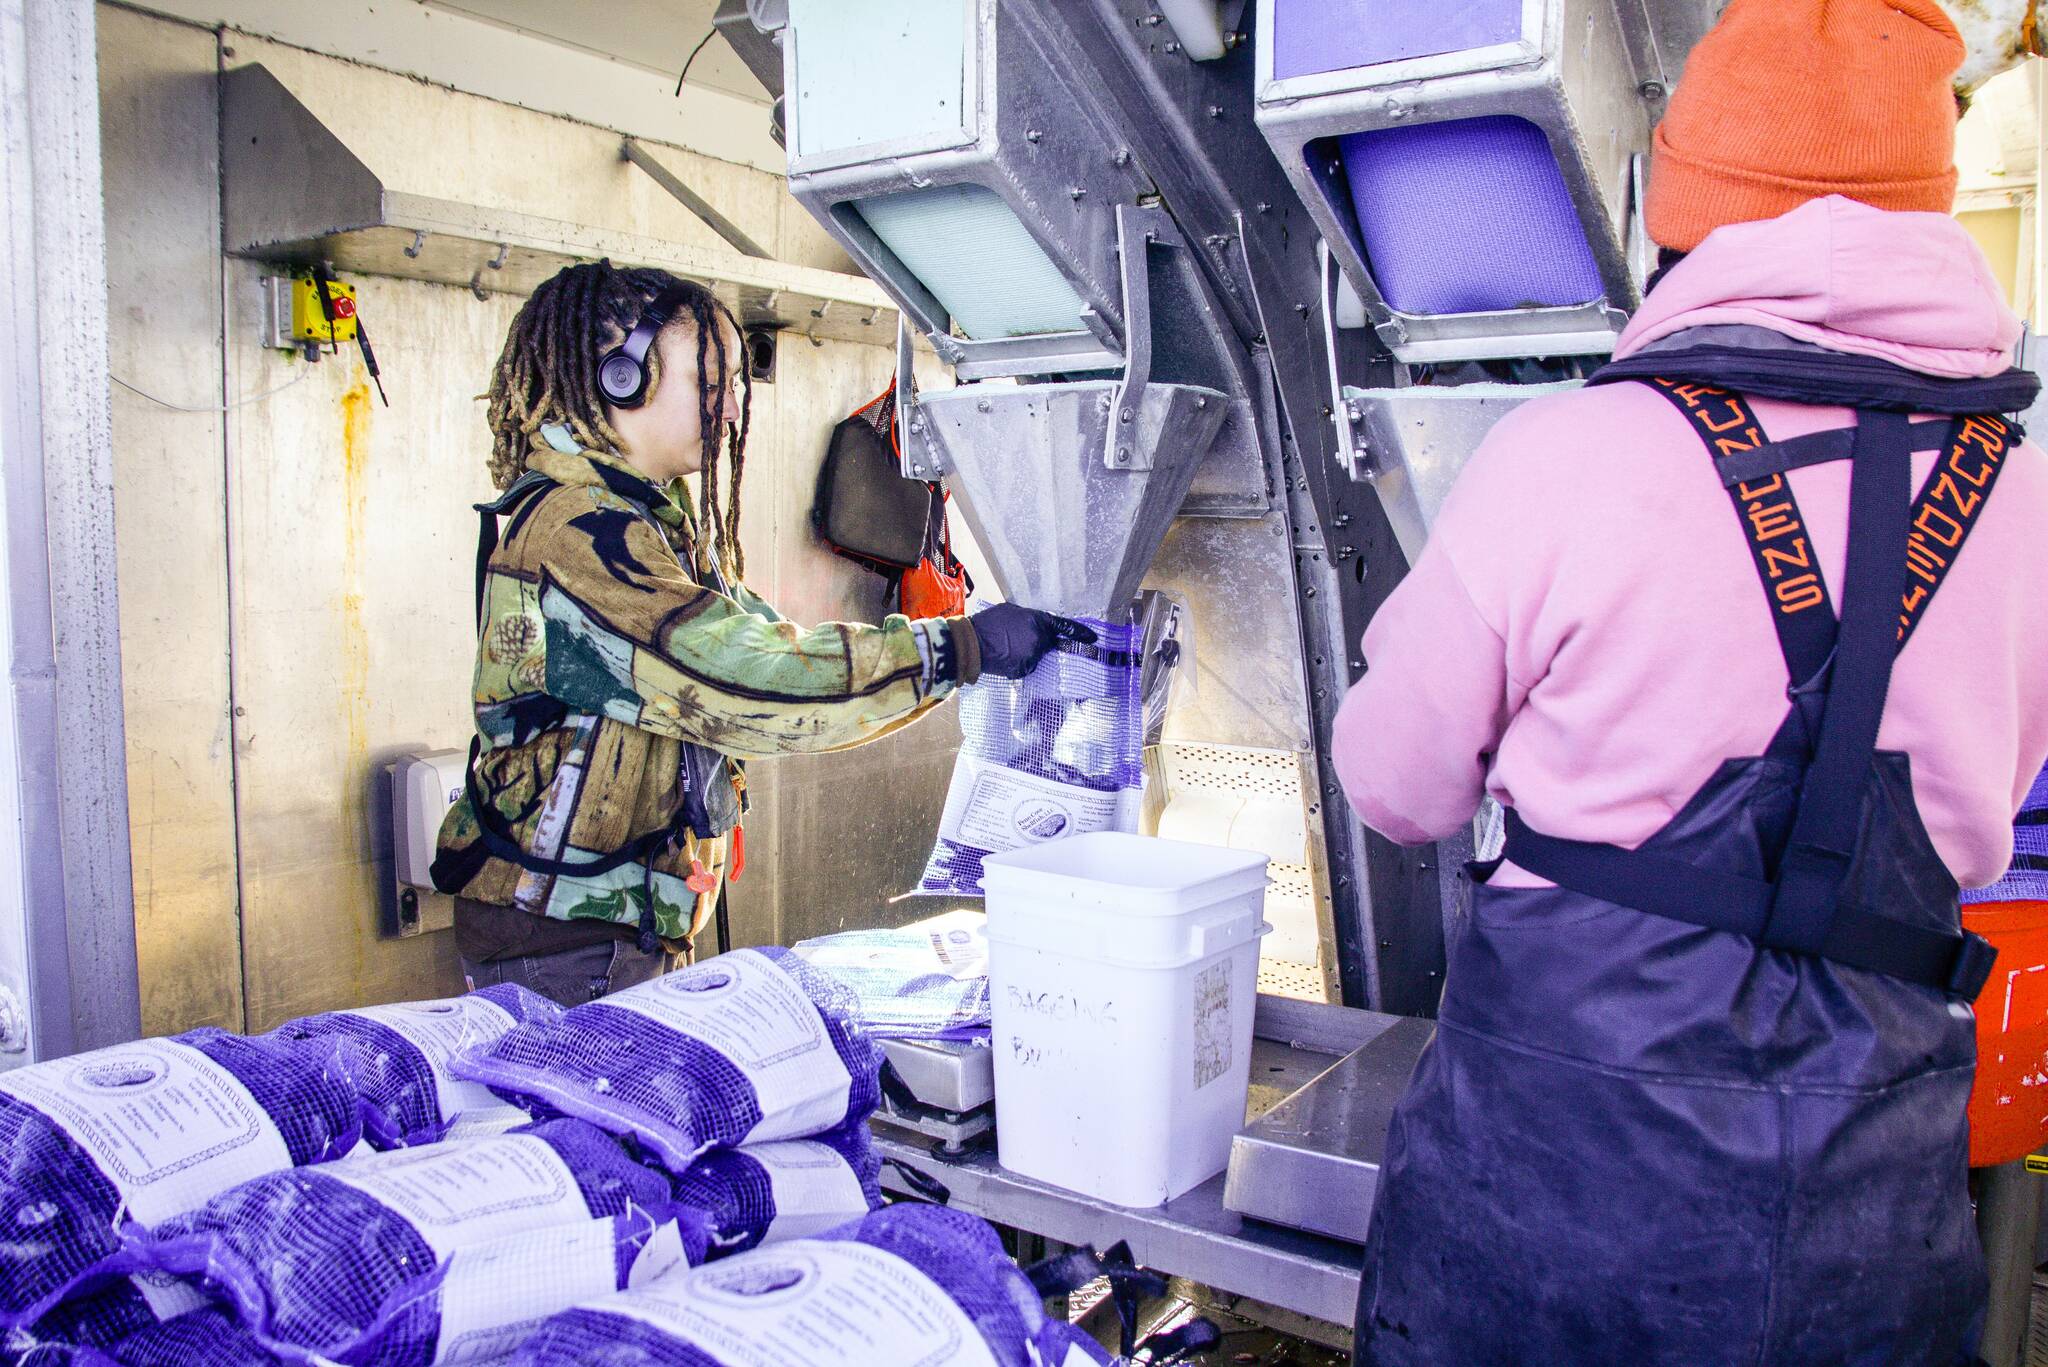 Staff at Penn Cove Shellfish fill bags with mussels before they weigh them. (Photo by Luisa Loi)